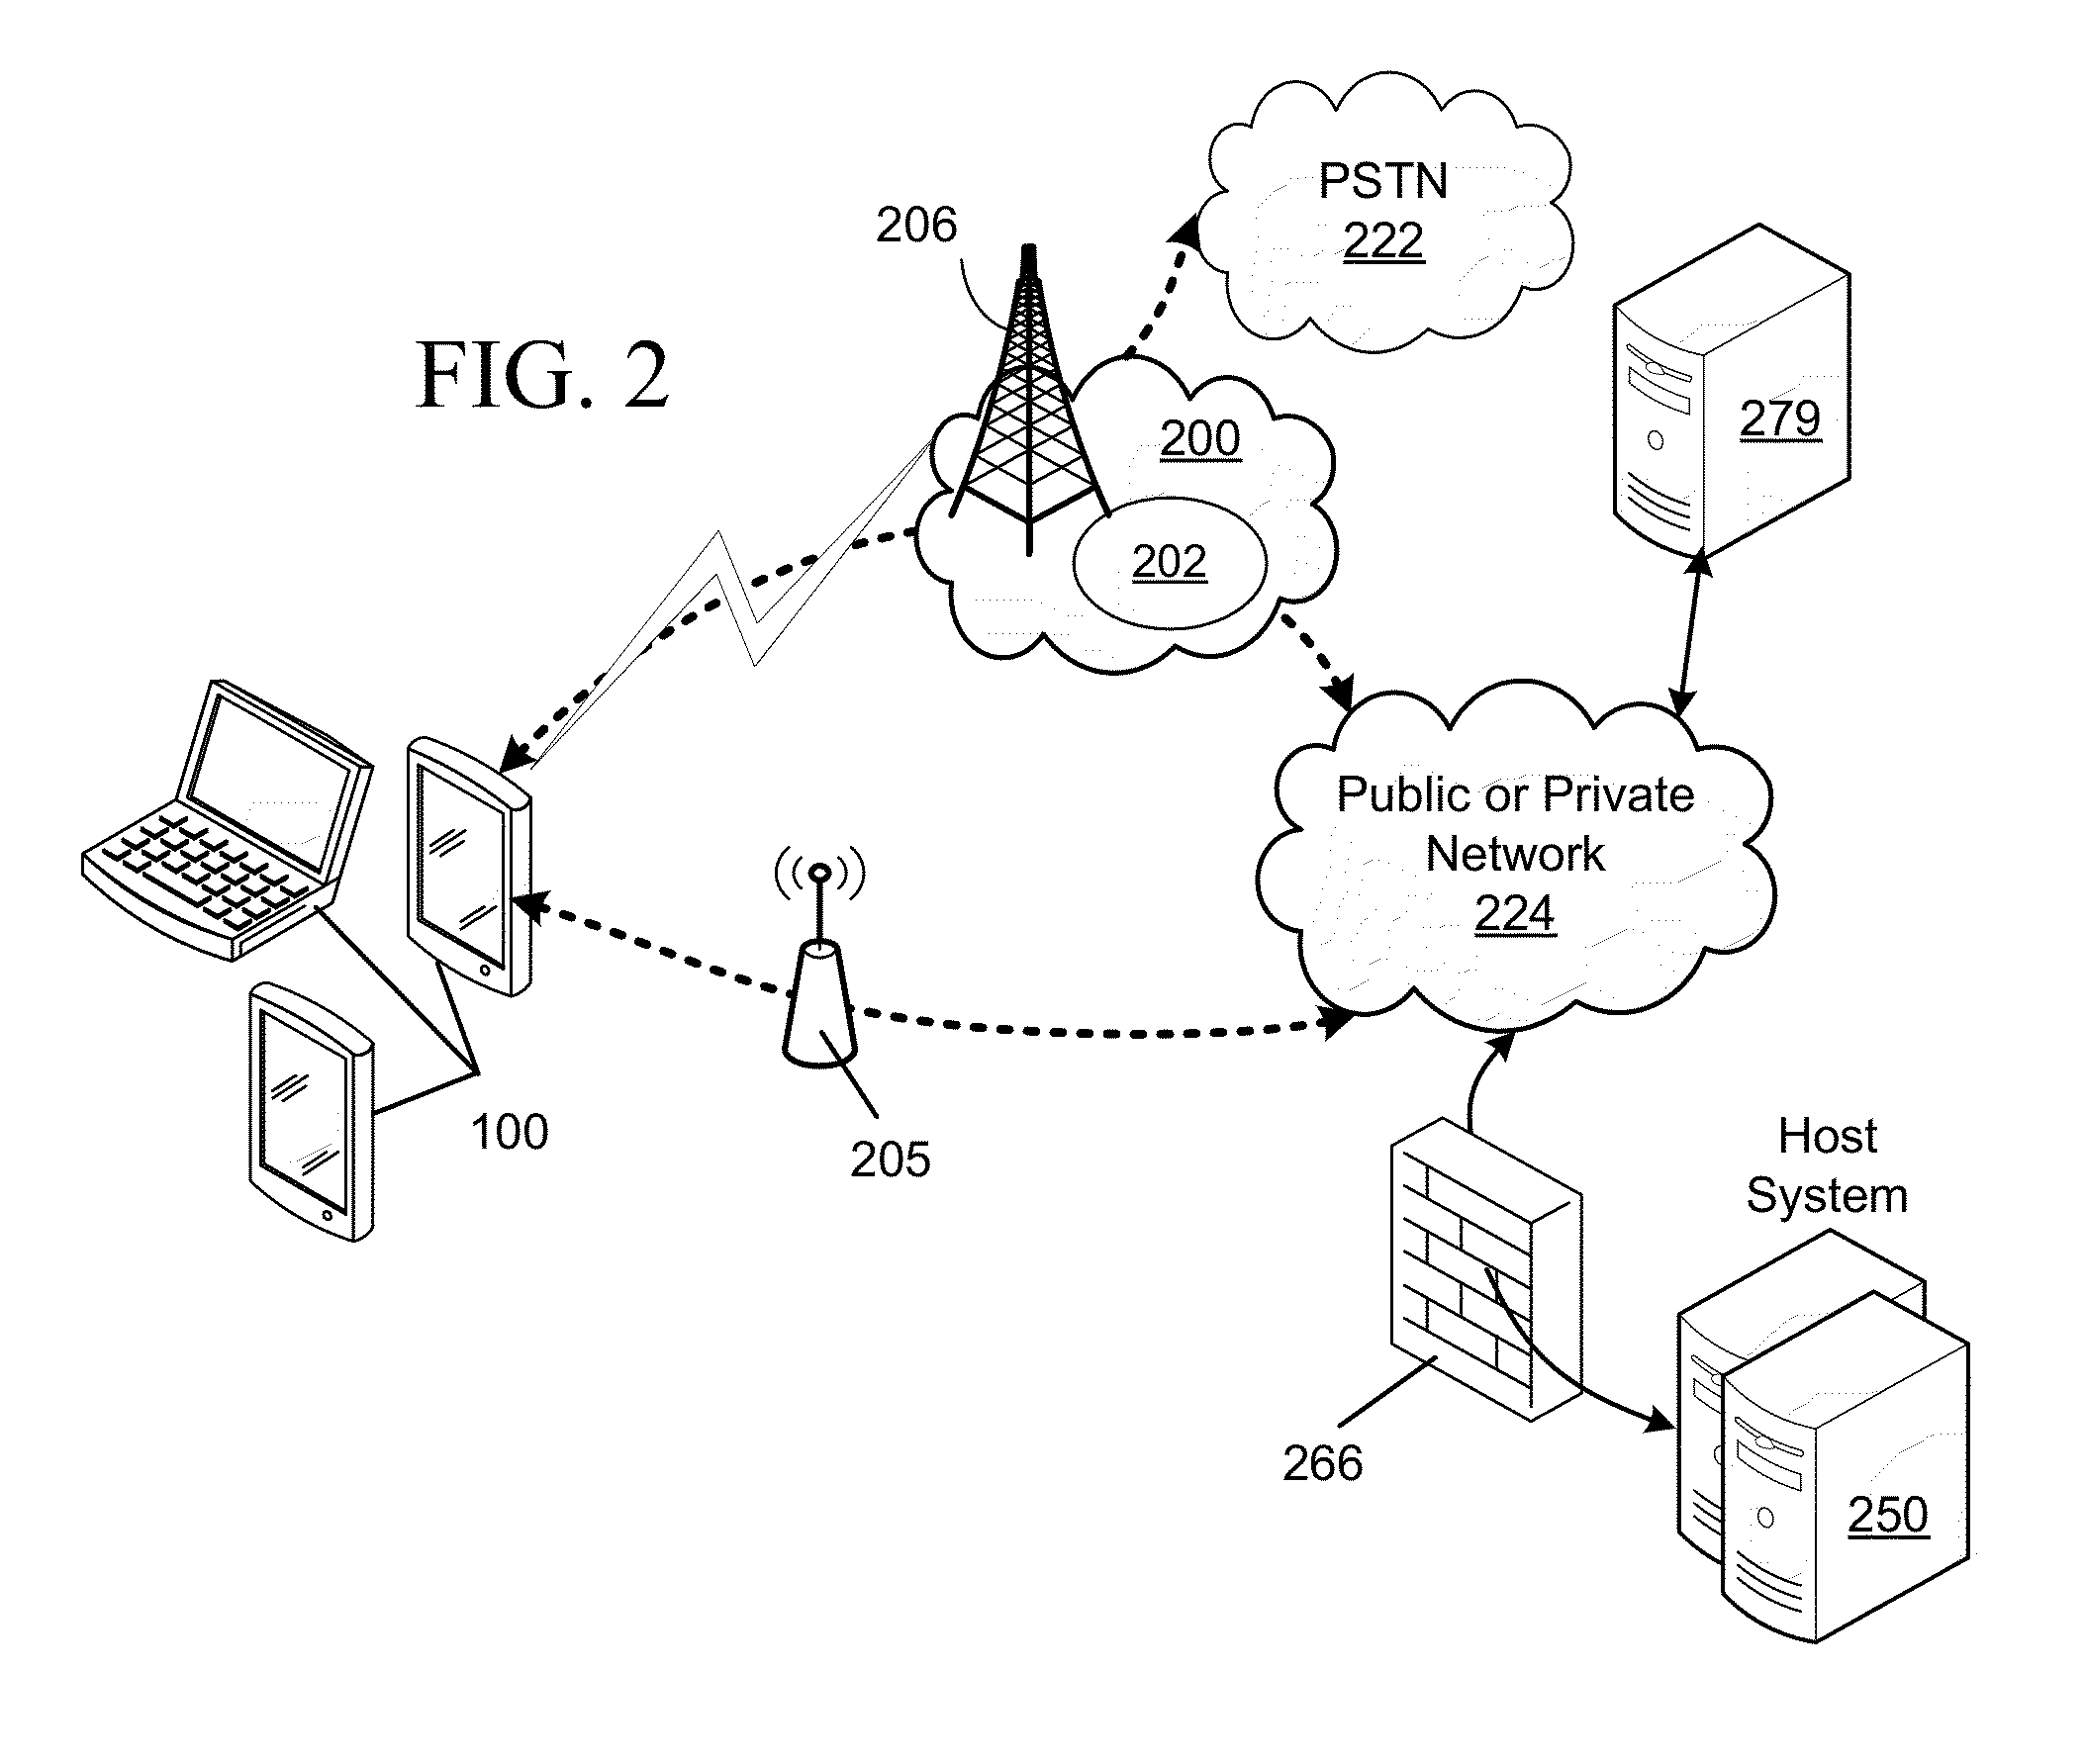 Method and apparatus for operation of a computing device